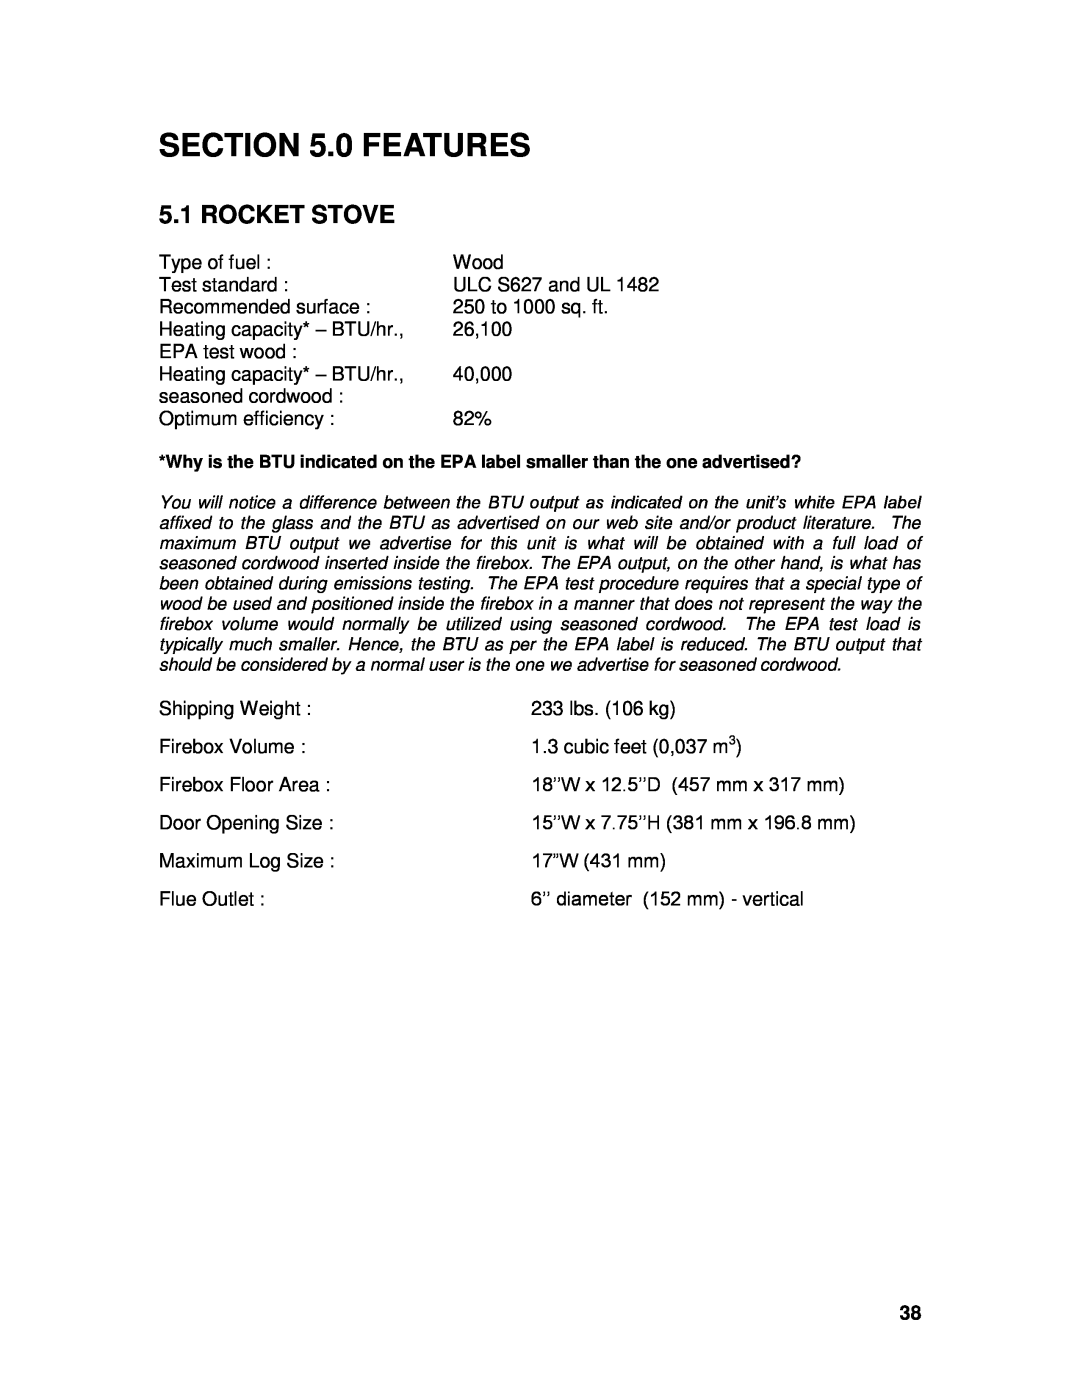 Drolet 45521A owner manual 0 FEATURES, Rocket Stove 